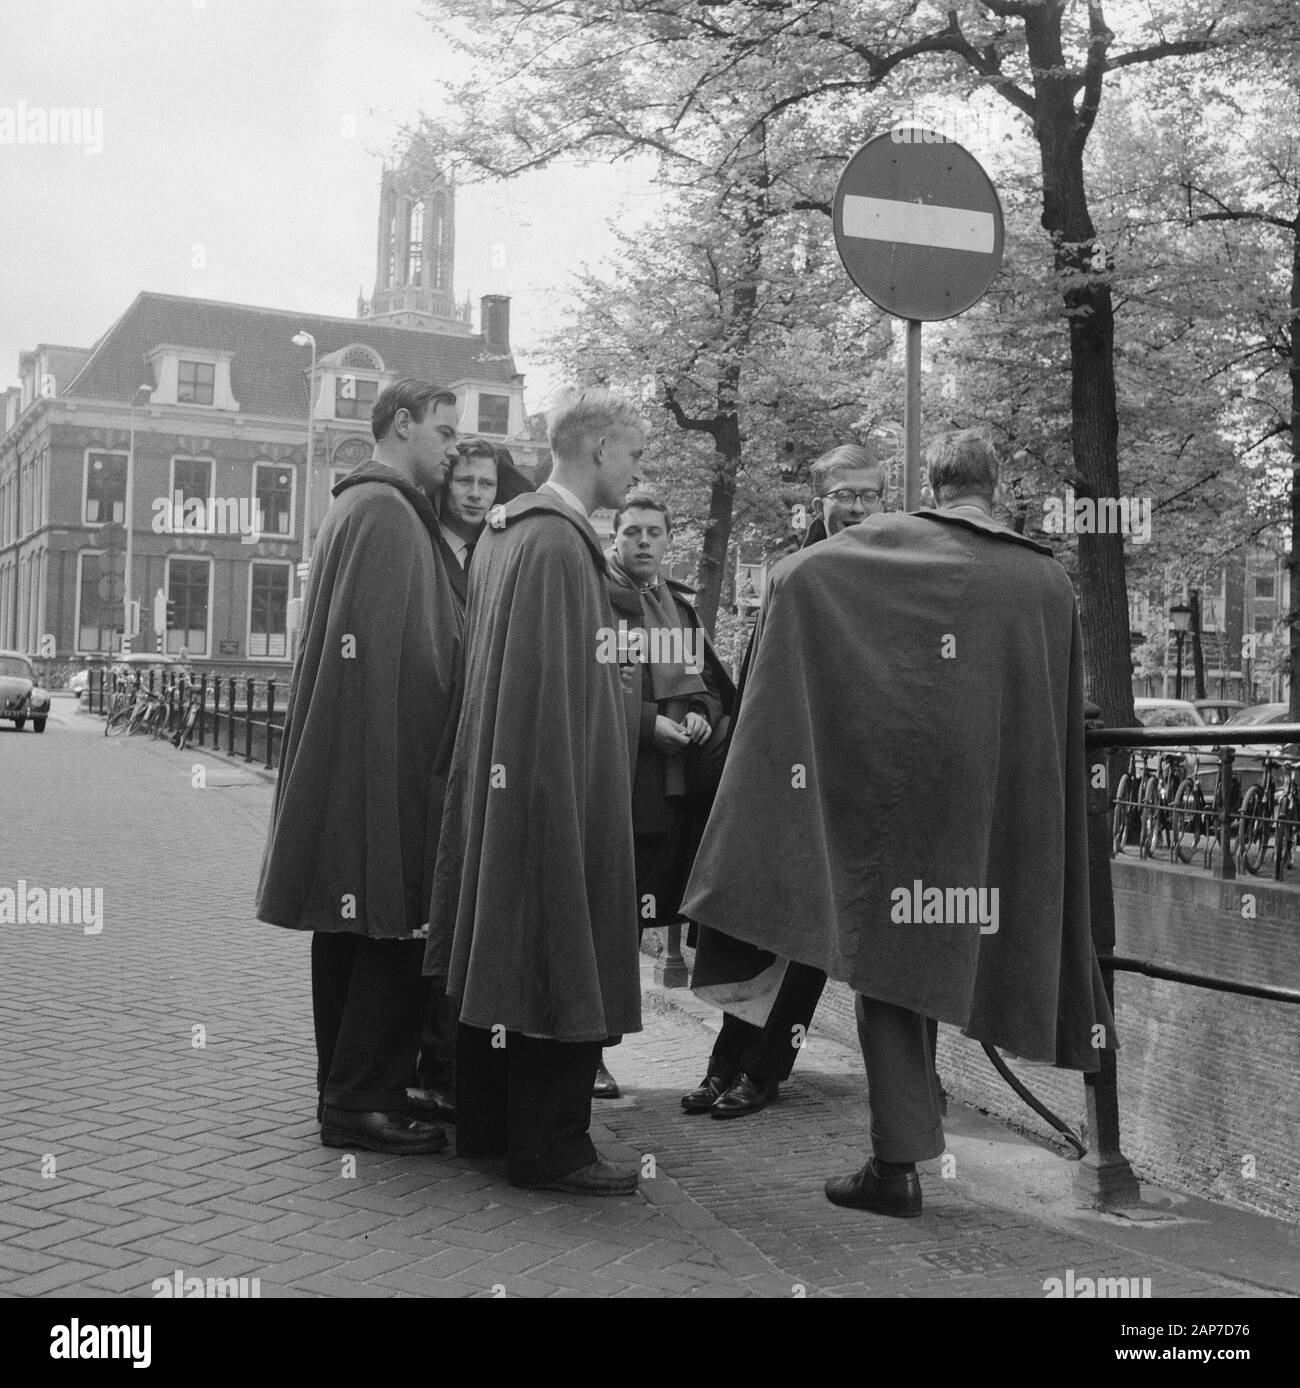 Capes for students in Utrecht in connection with 325 anniversary of the corps Date: 5 May 1961 Location: Utrecht Keywords: corps, students Stock Photo